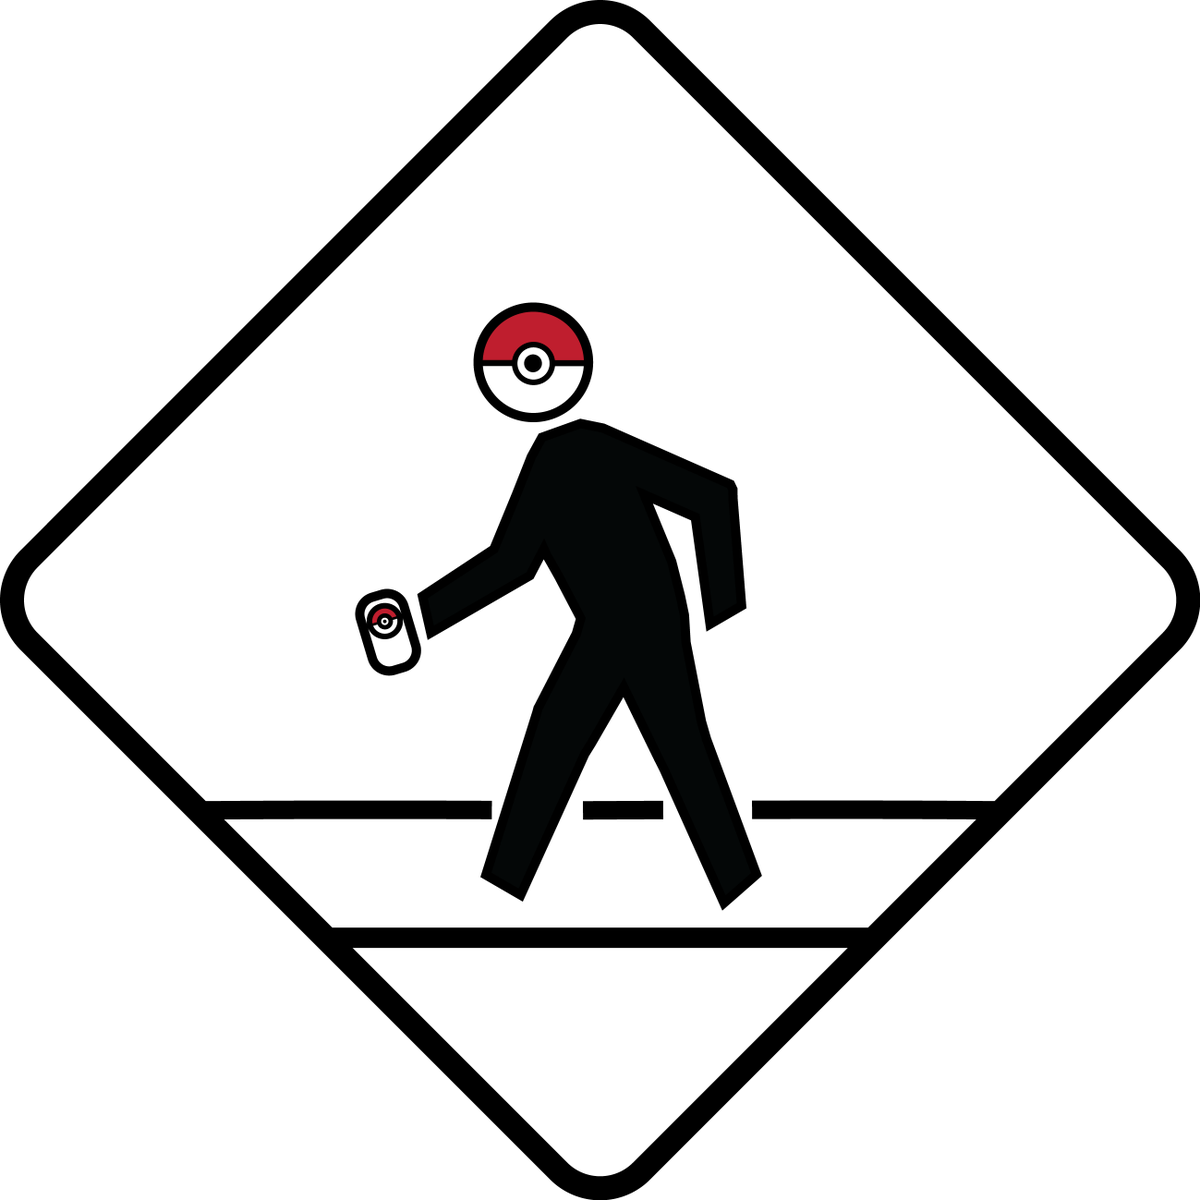 Made This For All The Pokemon Go Players Out There - Pedestrian Crossing Sign (1200x1200)